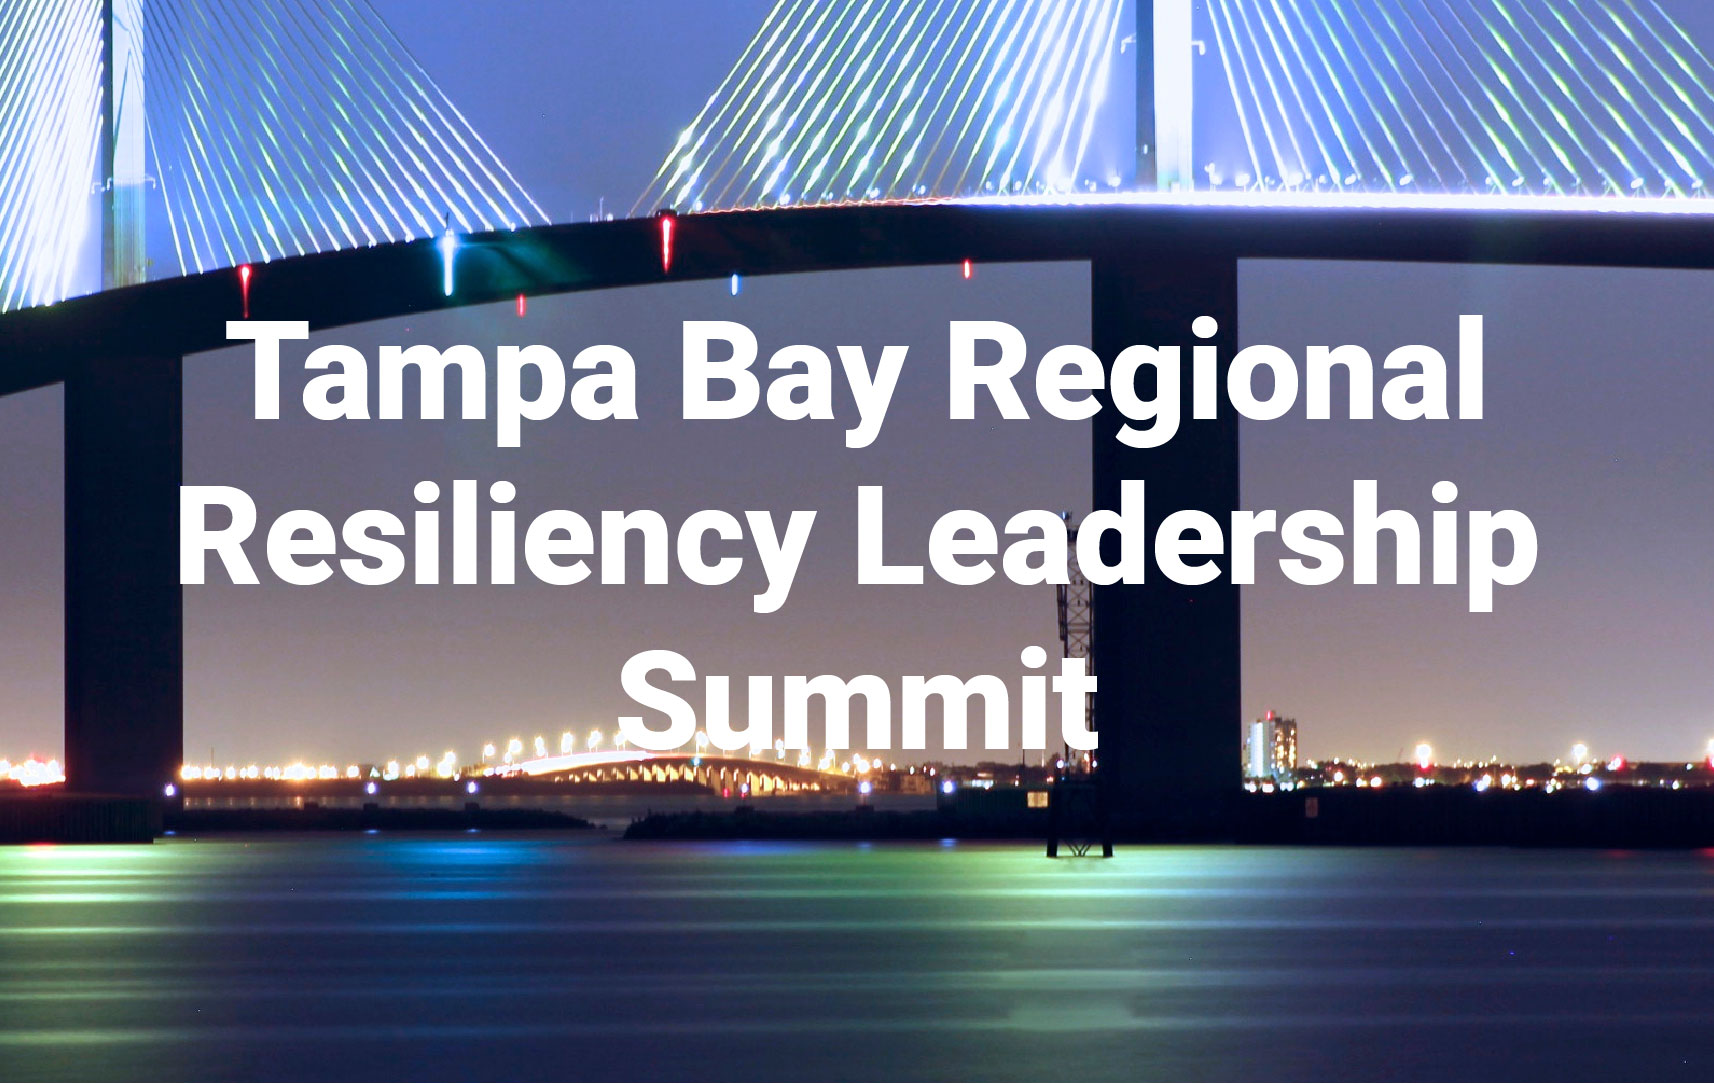 Tampa Bay Regional Resiliency Leadership Summit to feature insights from five coastal mayors